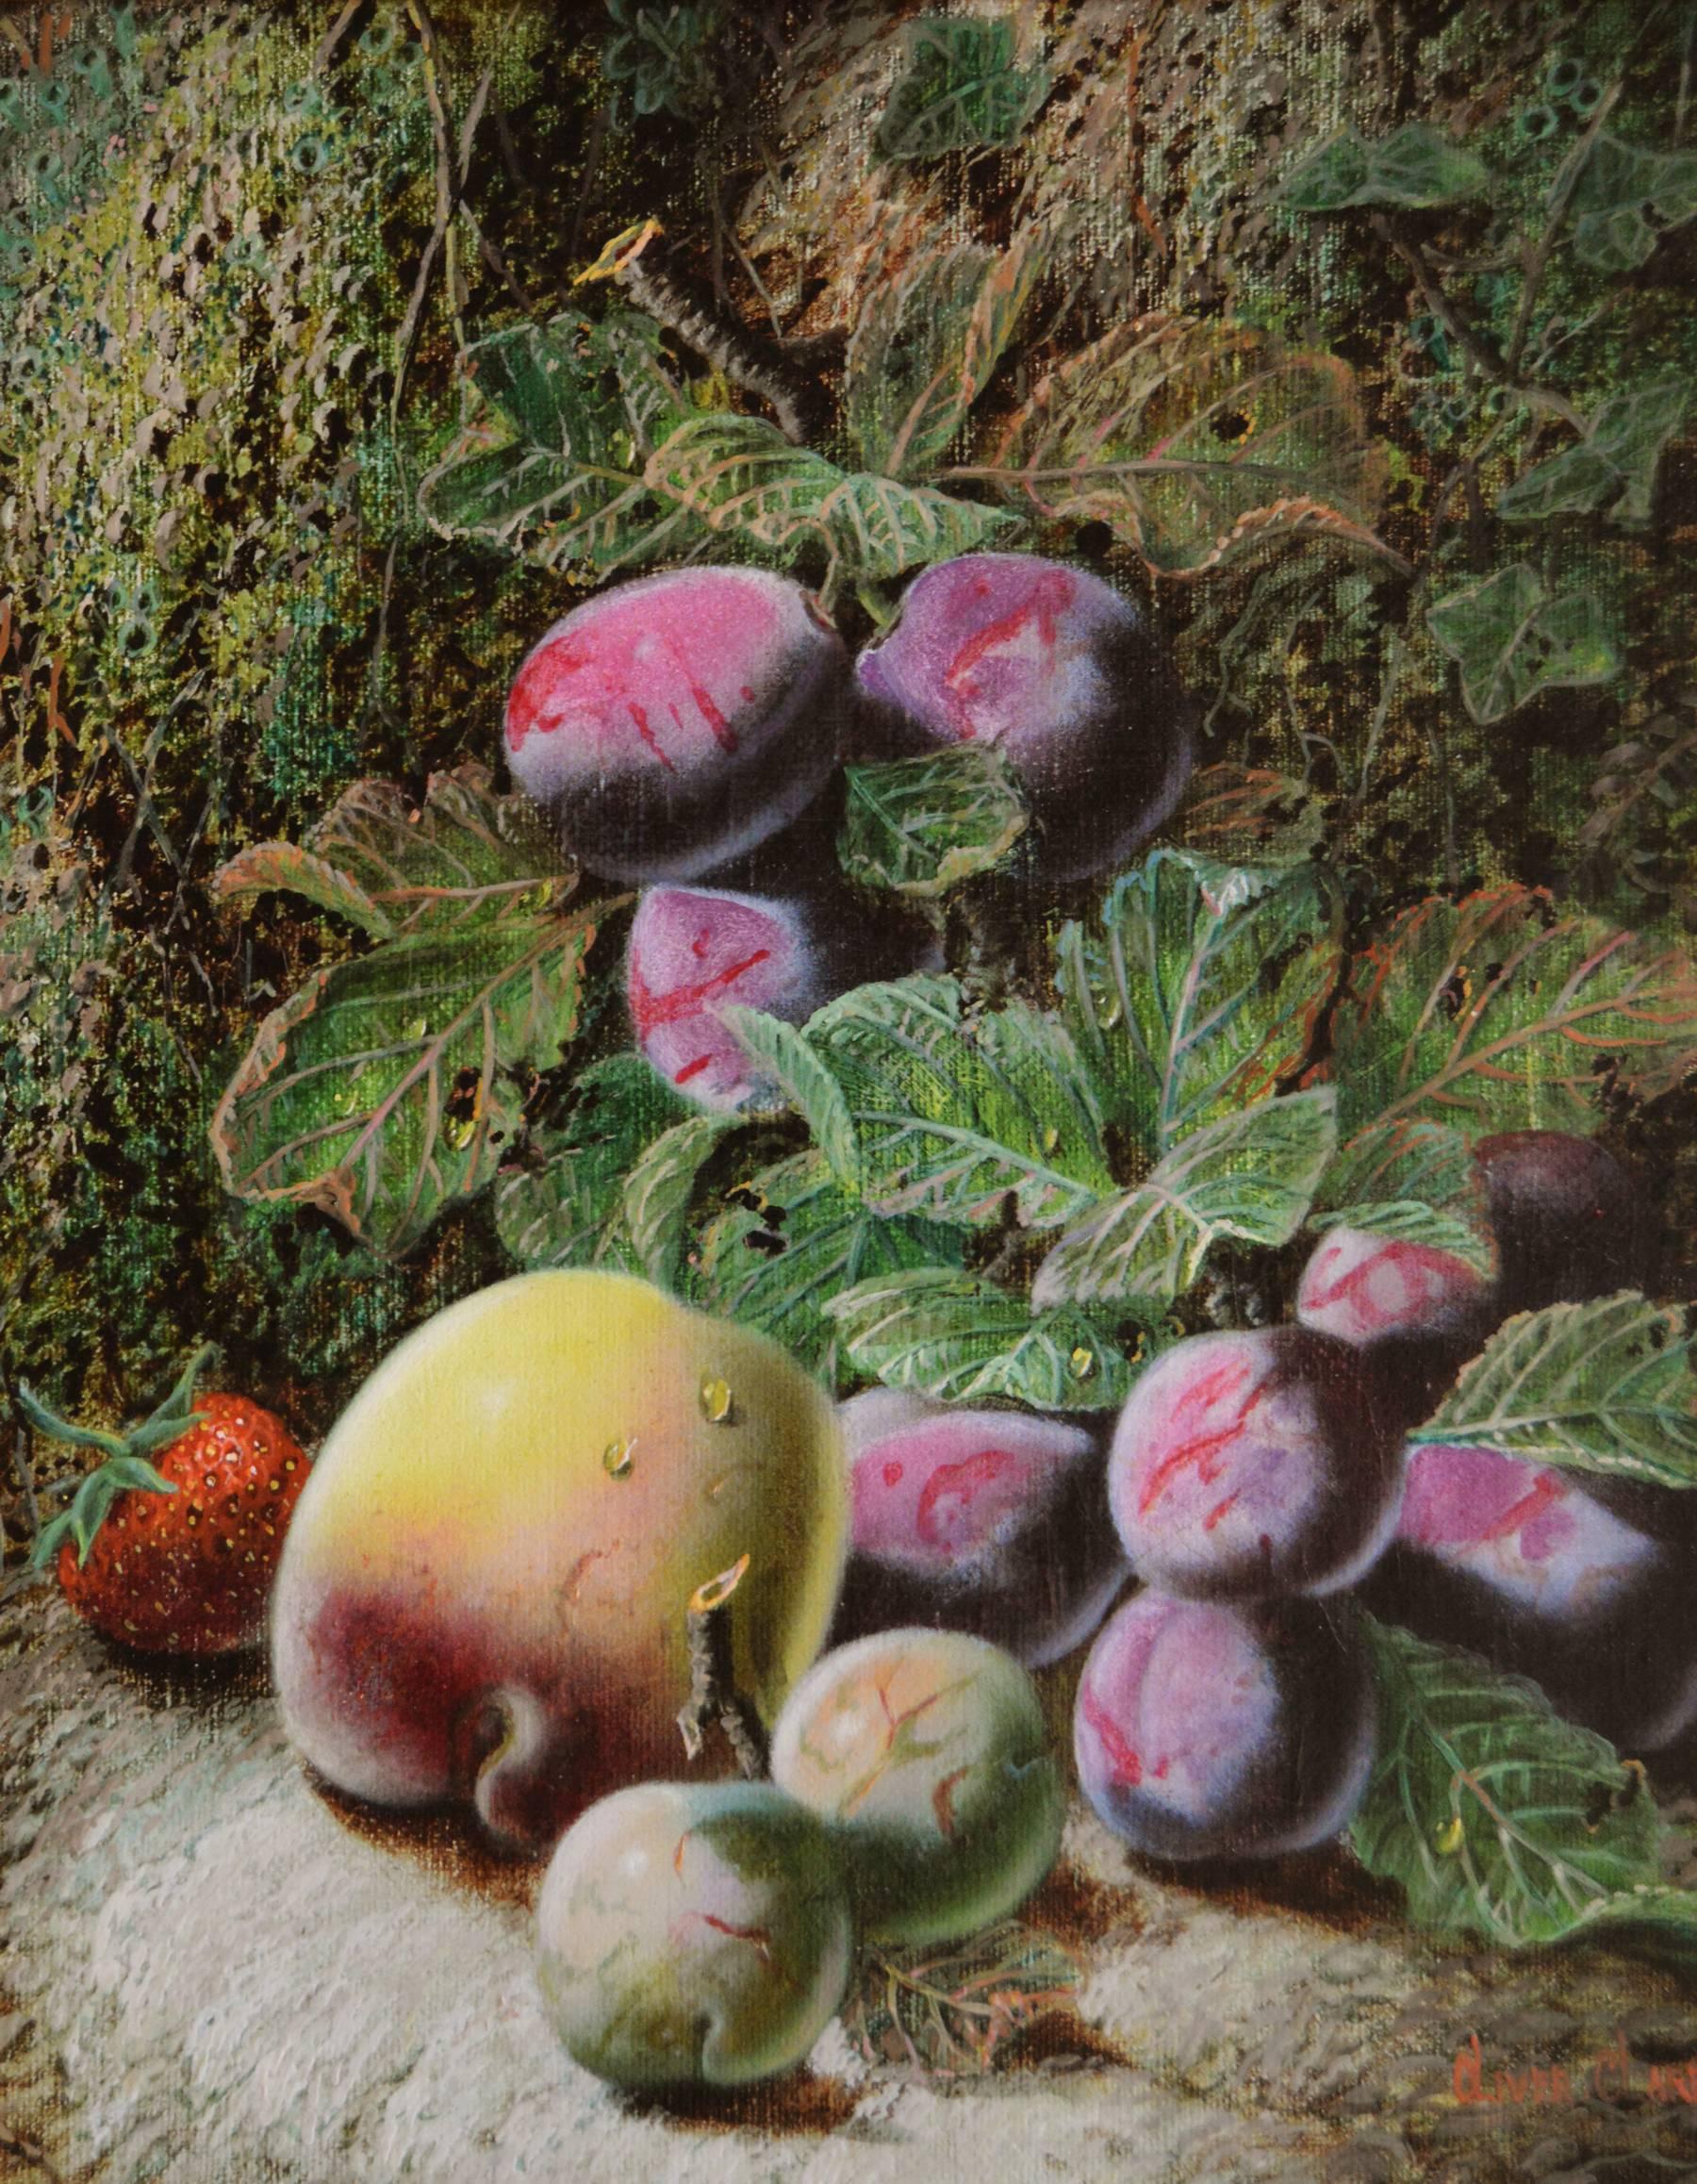 Oliver Clare
British, (1853-1927)
Still Life of Fruit
Oil on canvas, pair, both signed
Image size: 9½ inches x 7½ inches 
Size including frame: 17½ inches x 15½ inches

Oliver Clare was the son of George Clare and the brother of Vincent, all of whom